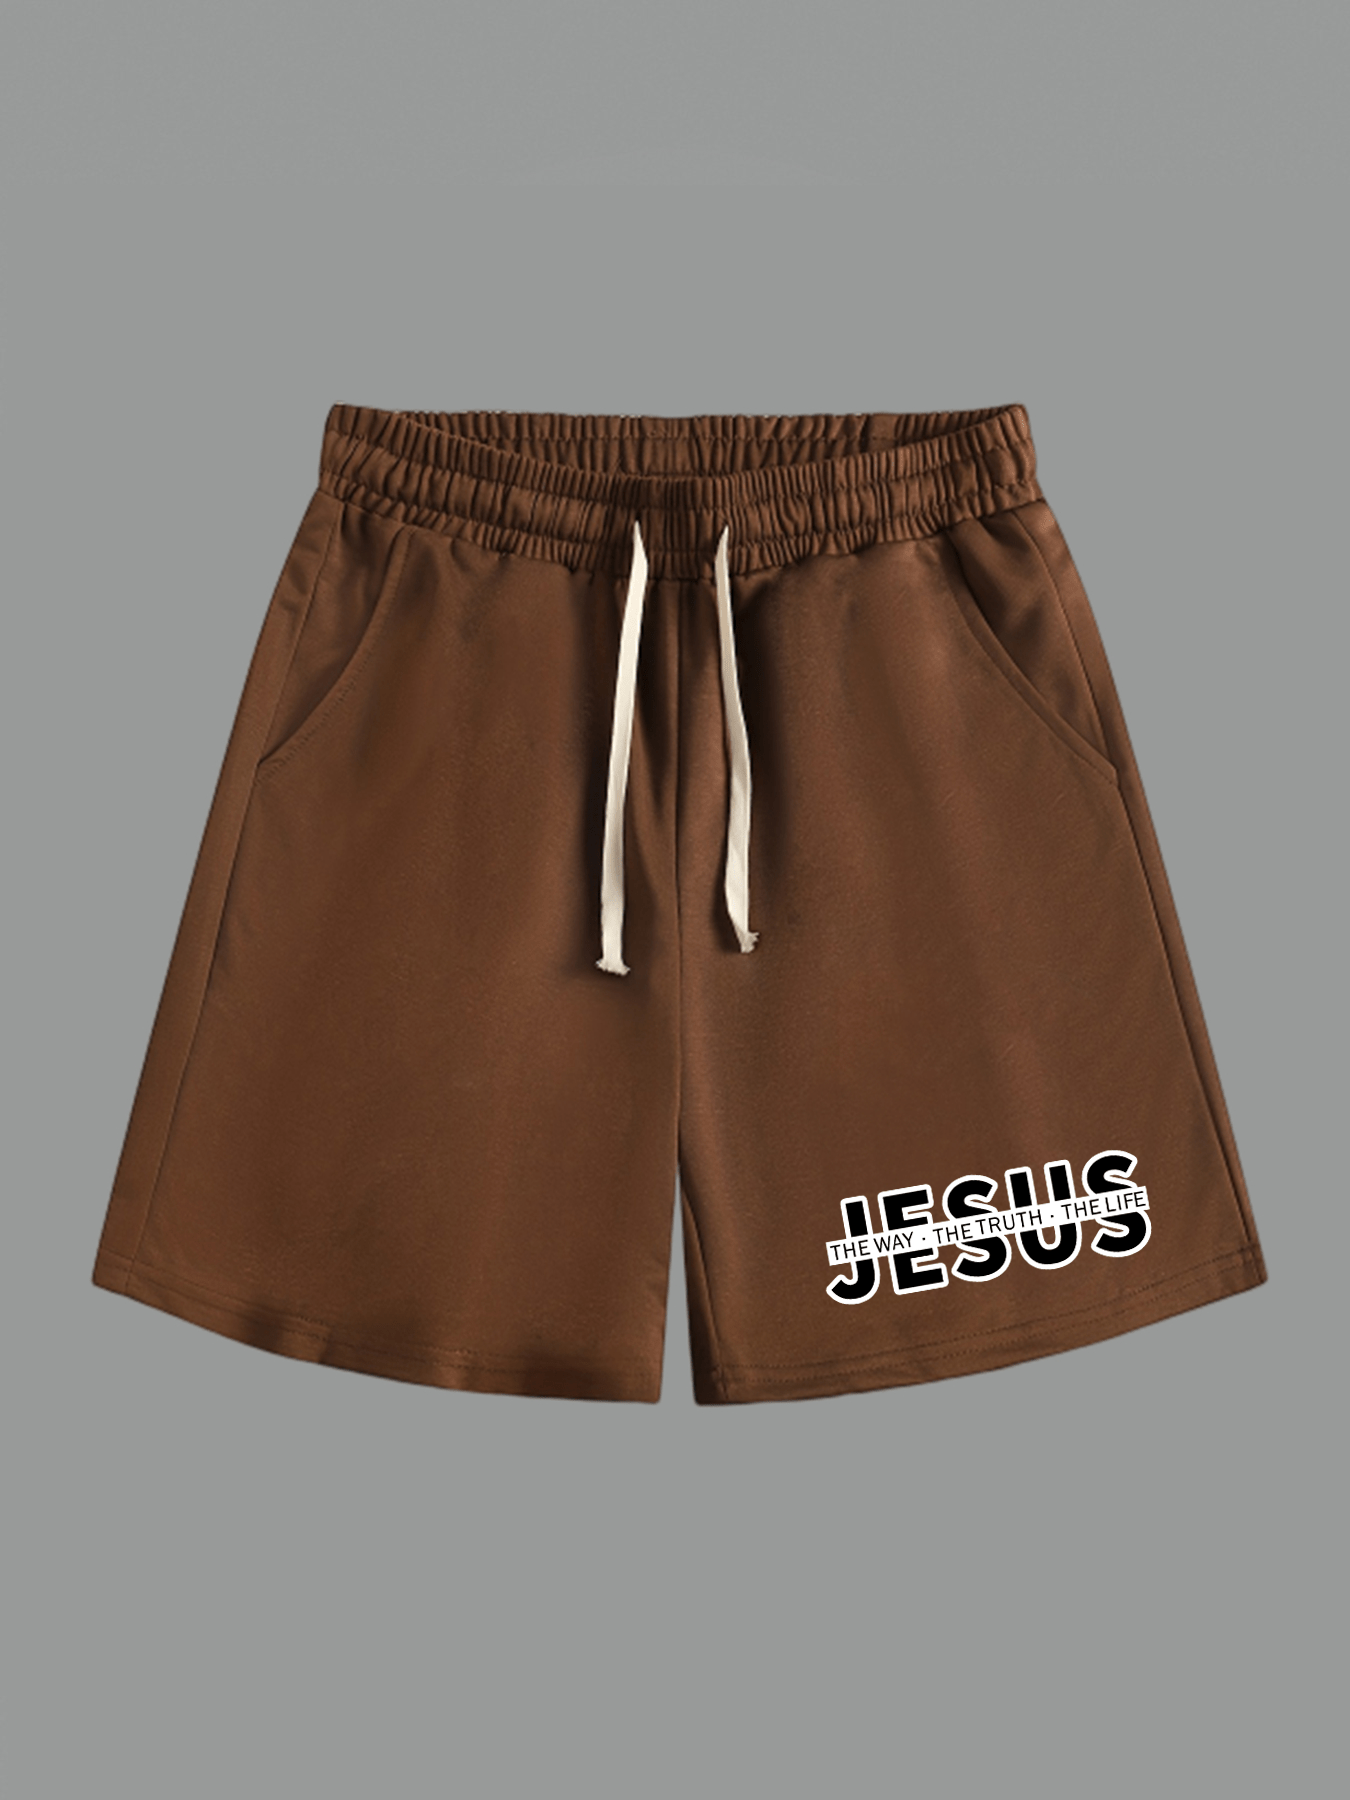 Jesus The Way The Truth The Life Men's Christian Shorts claimedbygoddesigns